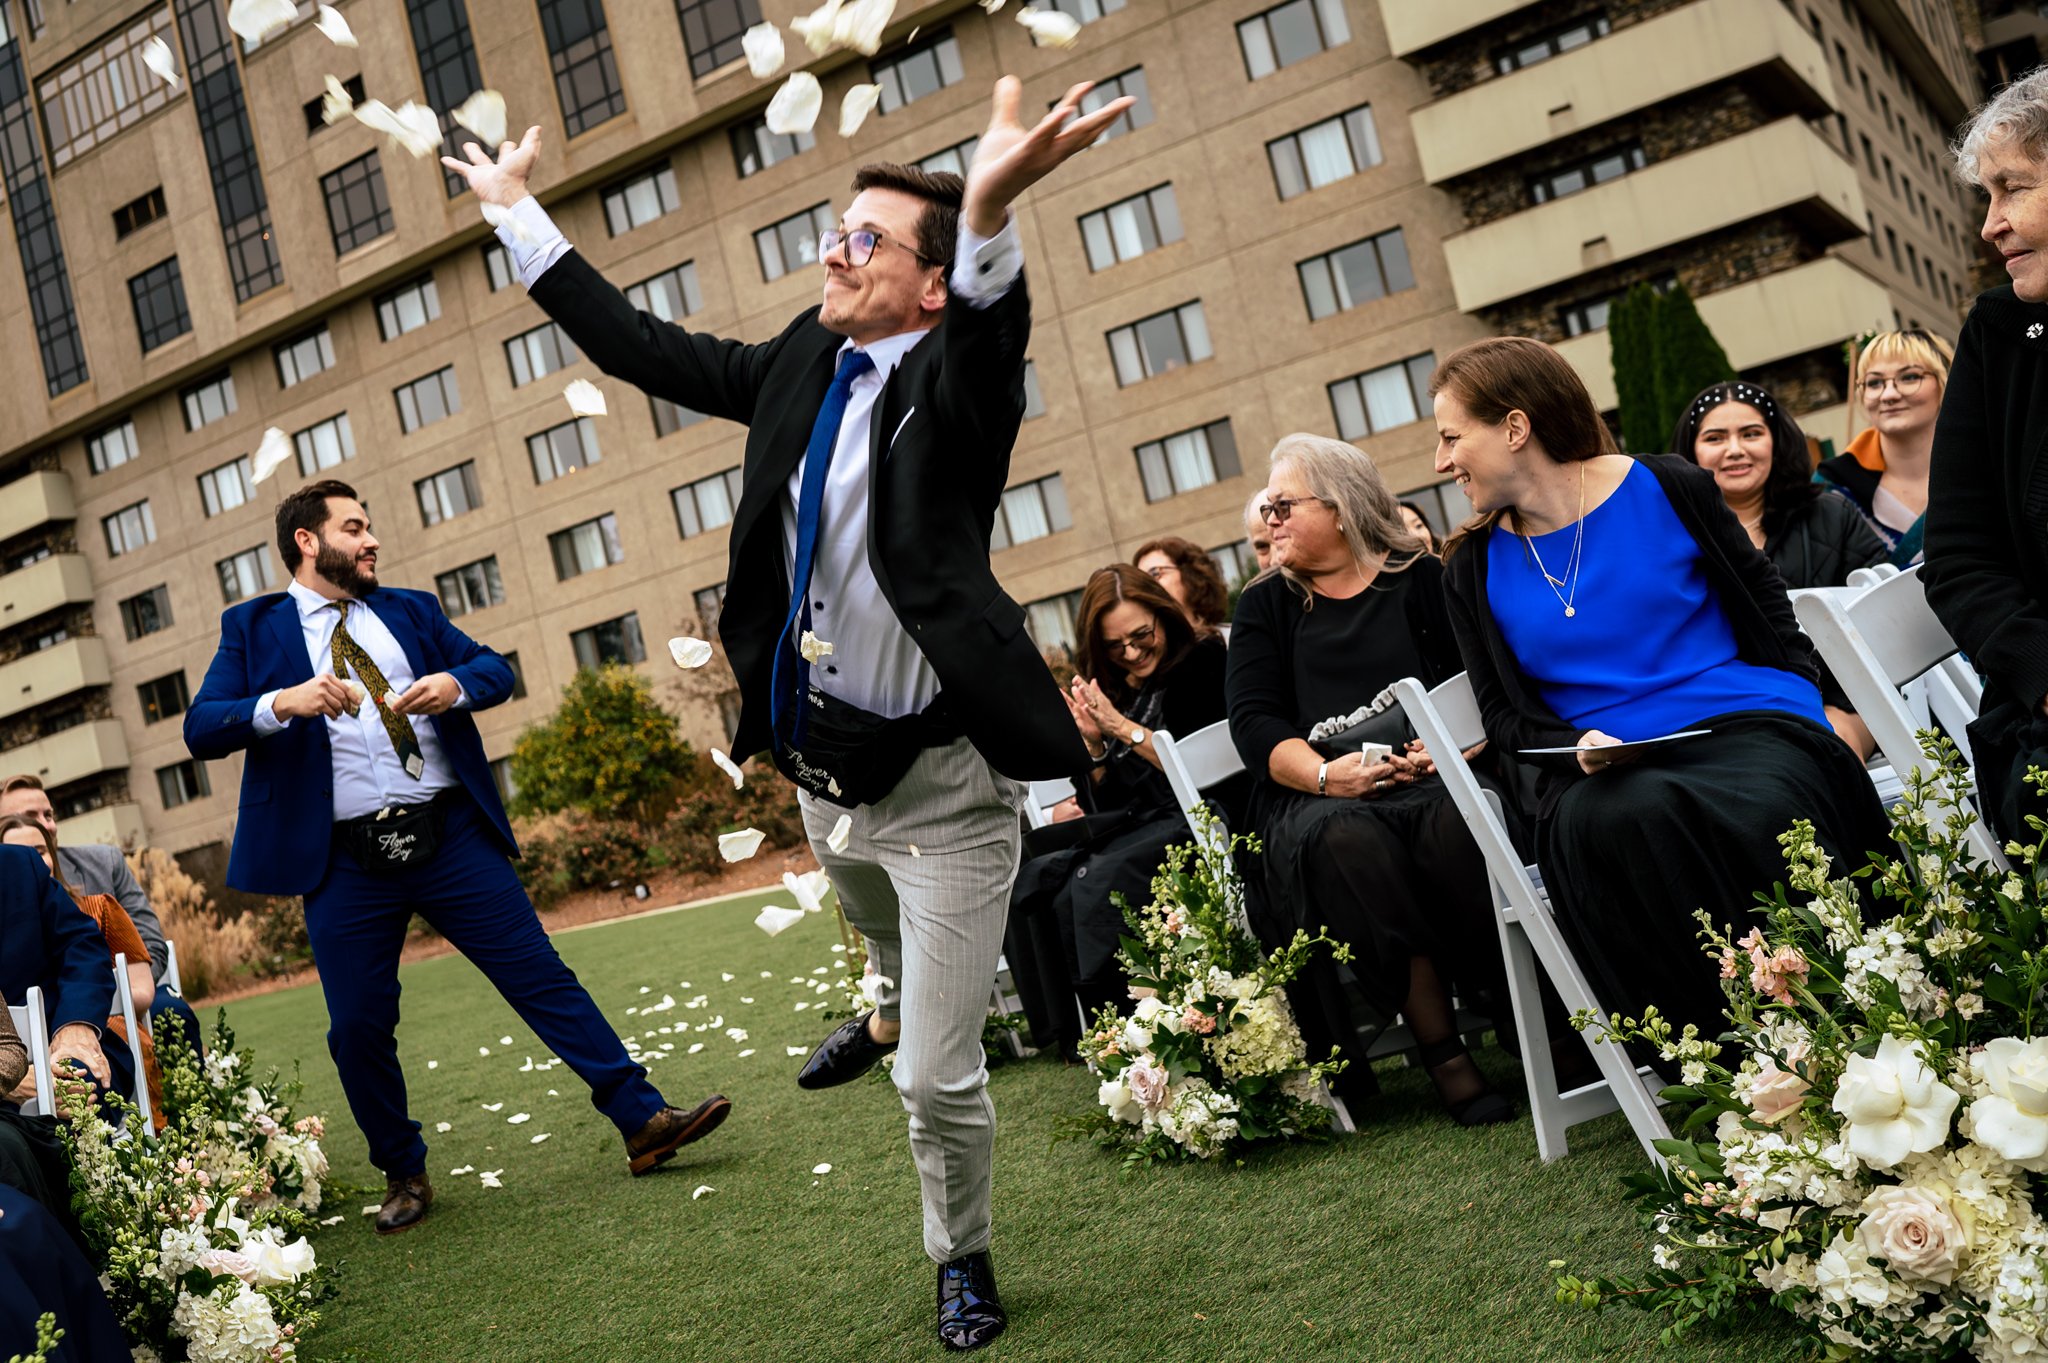 A man capturing joyful moments with his photography portfolio, throwing confetti at a wedding ceremony.